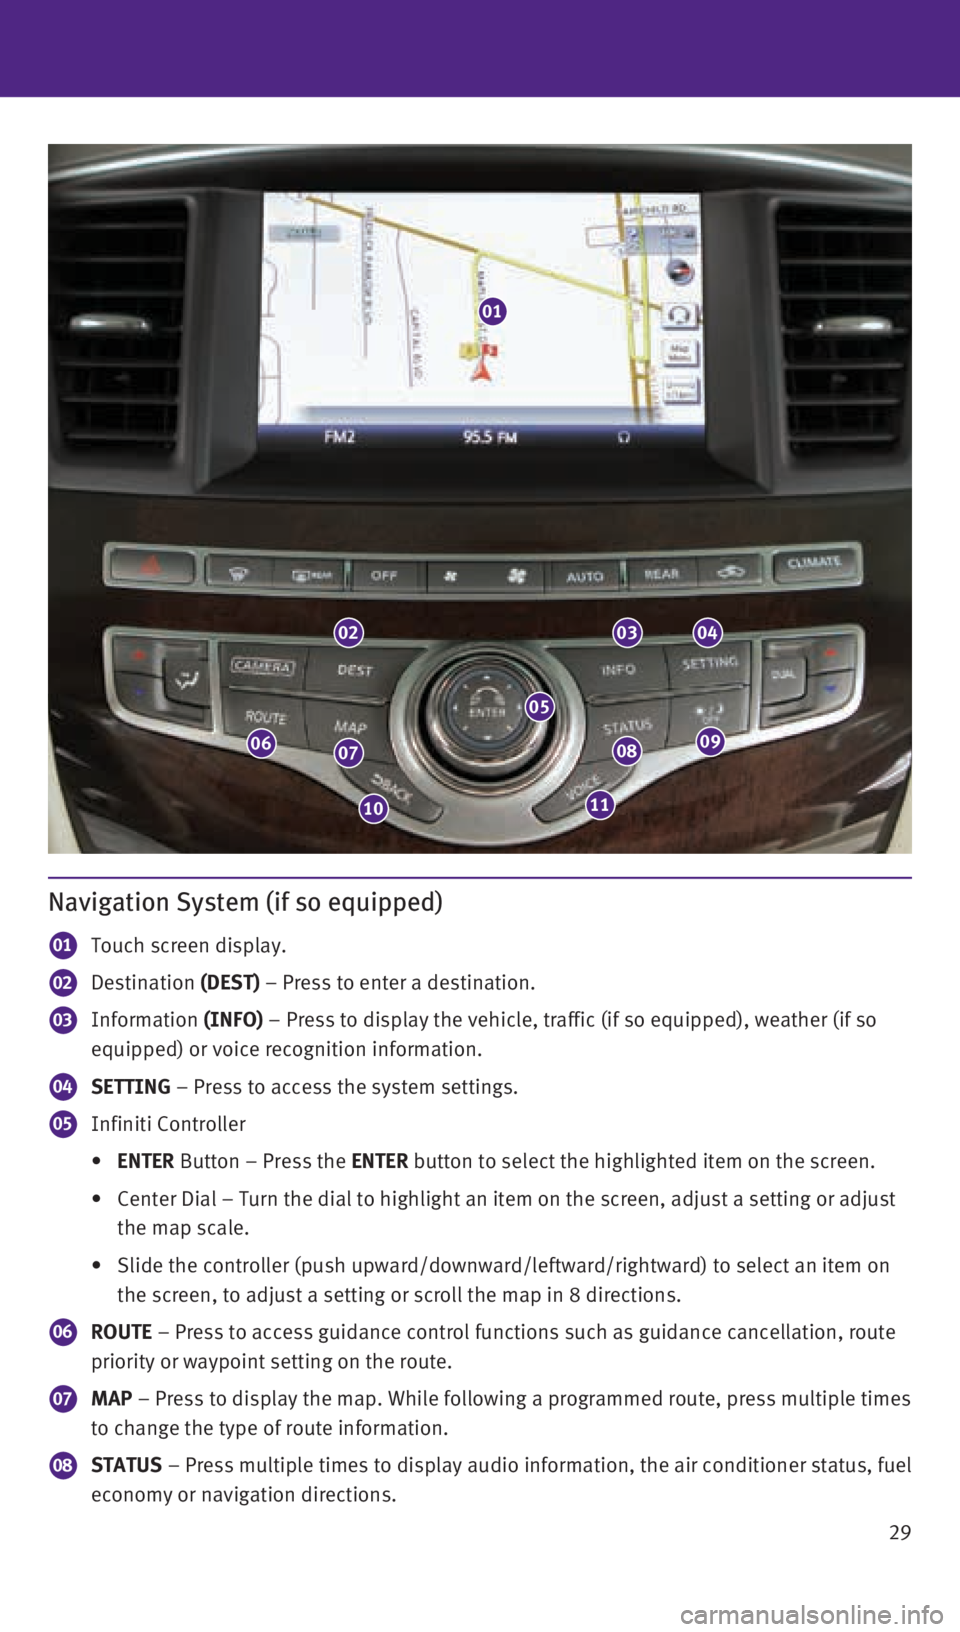 INFINITI QX60 HYBRID 2014  Quick Reference Guide 29
Navigation System (if so equipped)
01 Touch screen display.
02 Destination (DEST) – Press to enter a destination.
03  Information (INFO) – Press to display the vehicle, traffic (if so equipped)